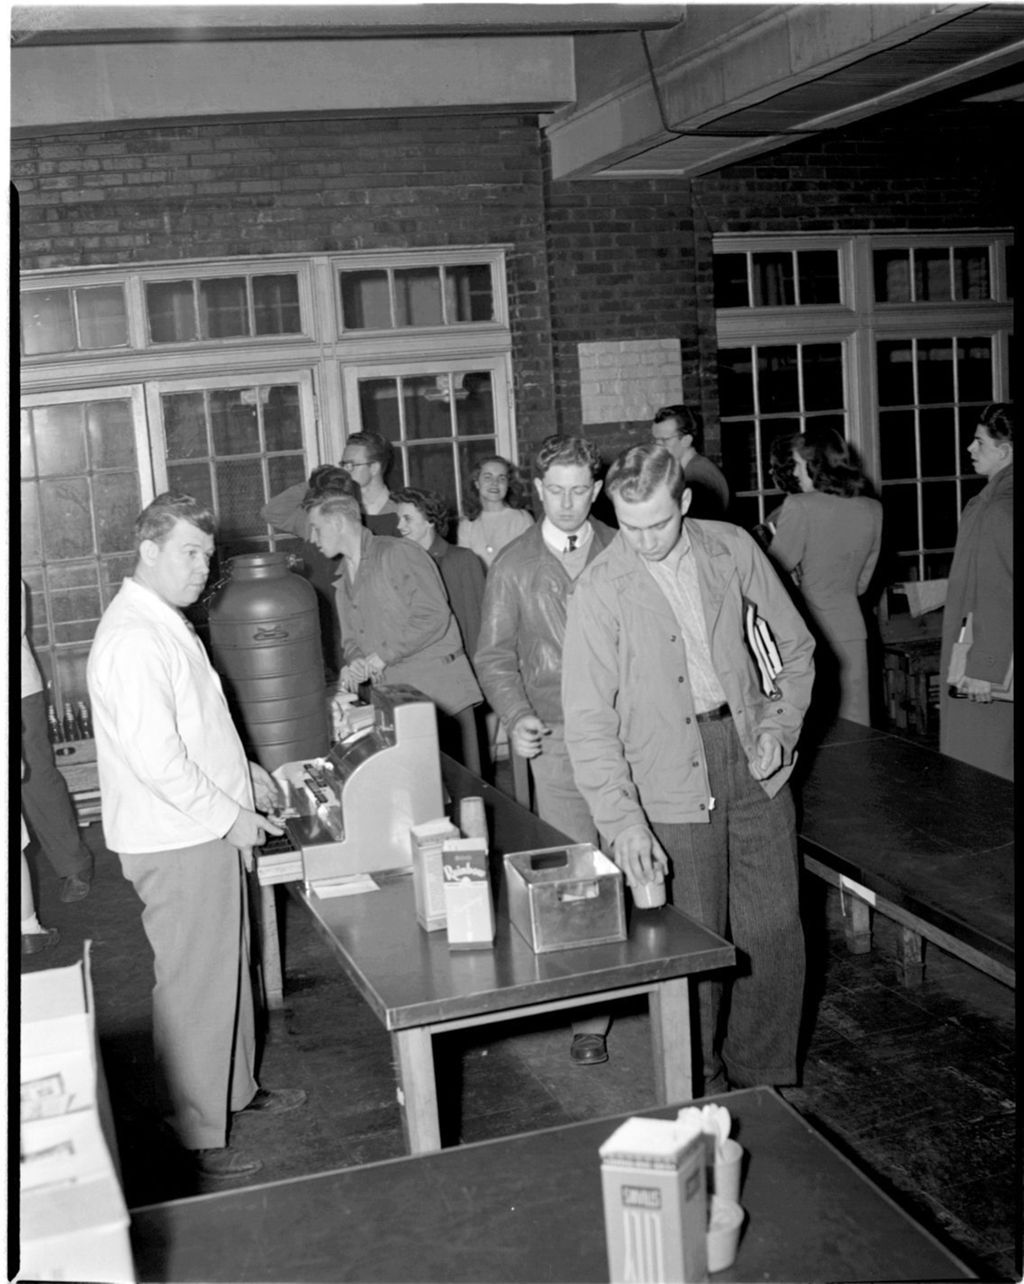 Miniature of Students at the Cashier in the Cafeteria, University of Illinois Chicago Undergraduate Division